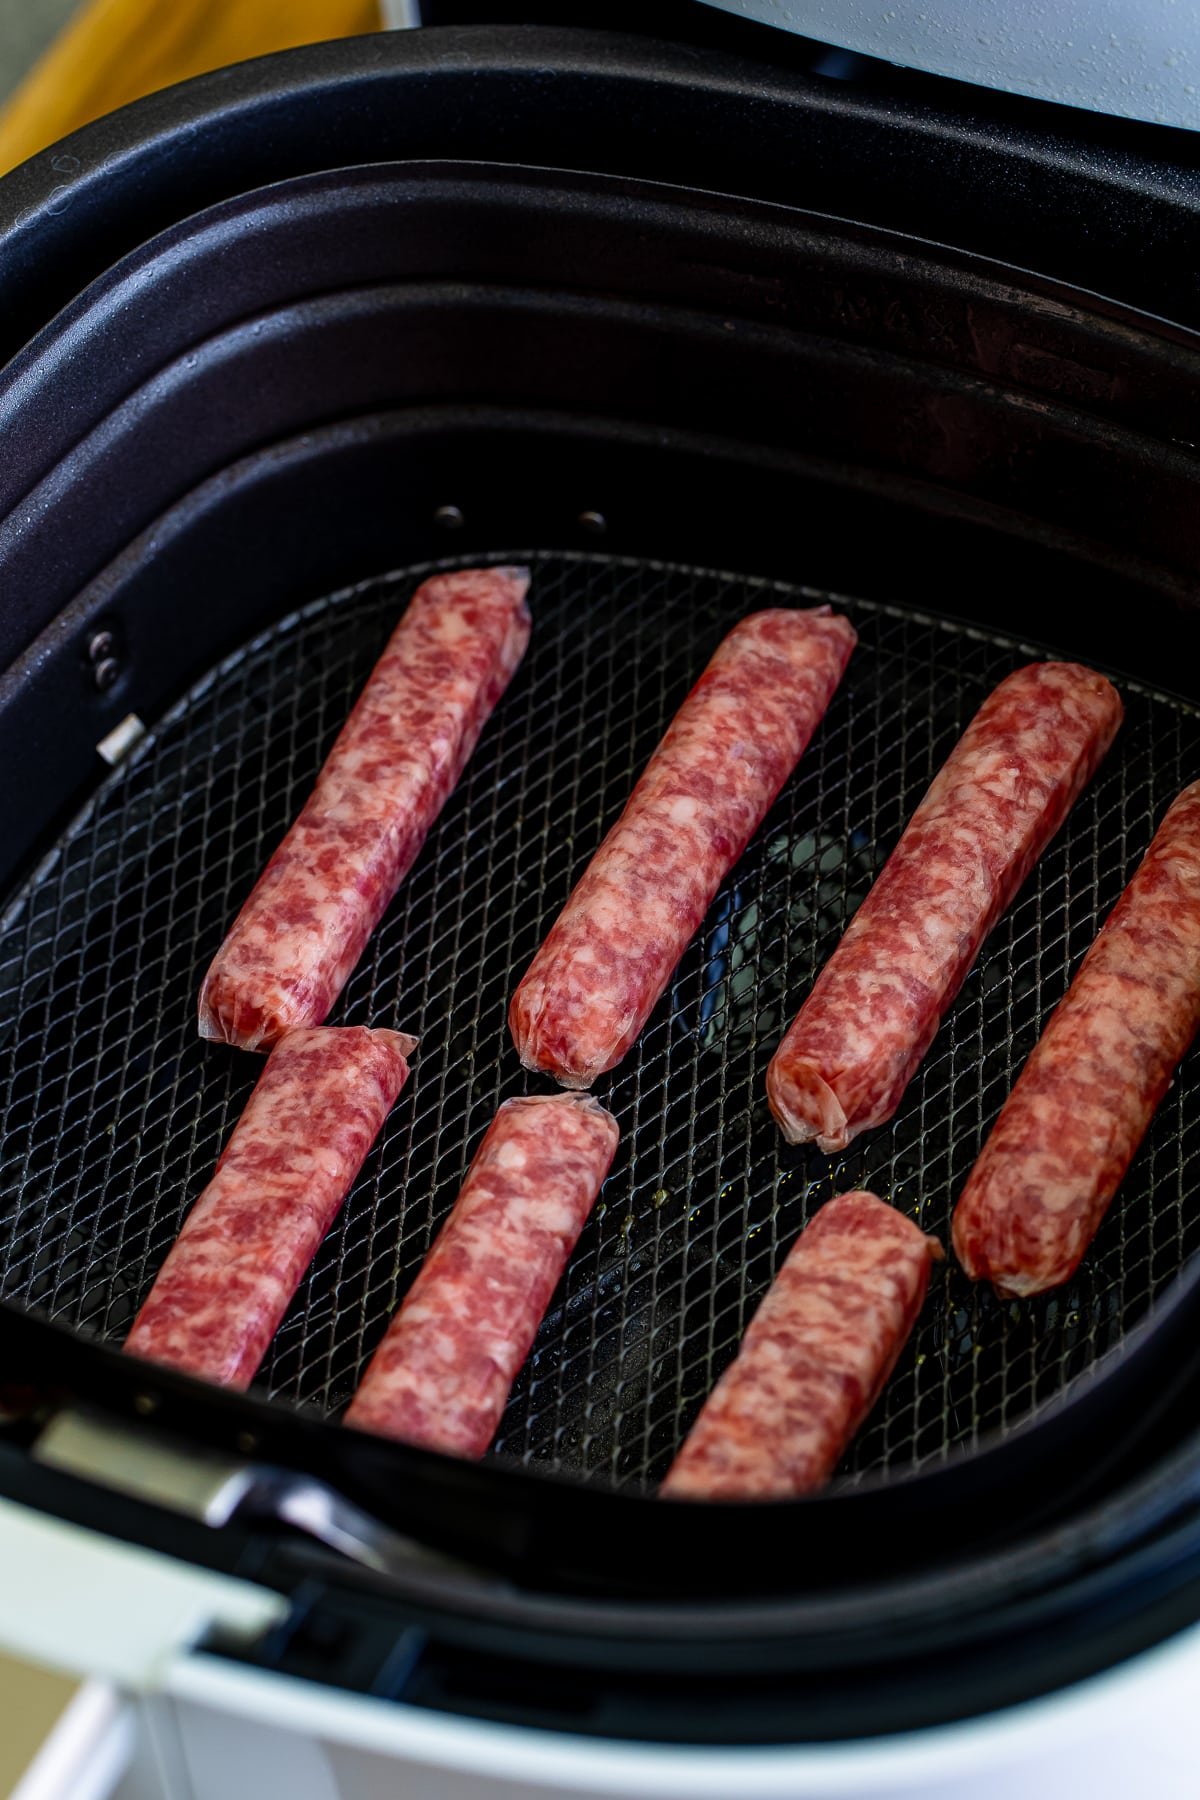 Raw breakfast sausage links sitting in a basket of a white air fryer